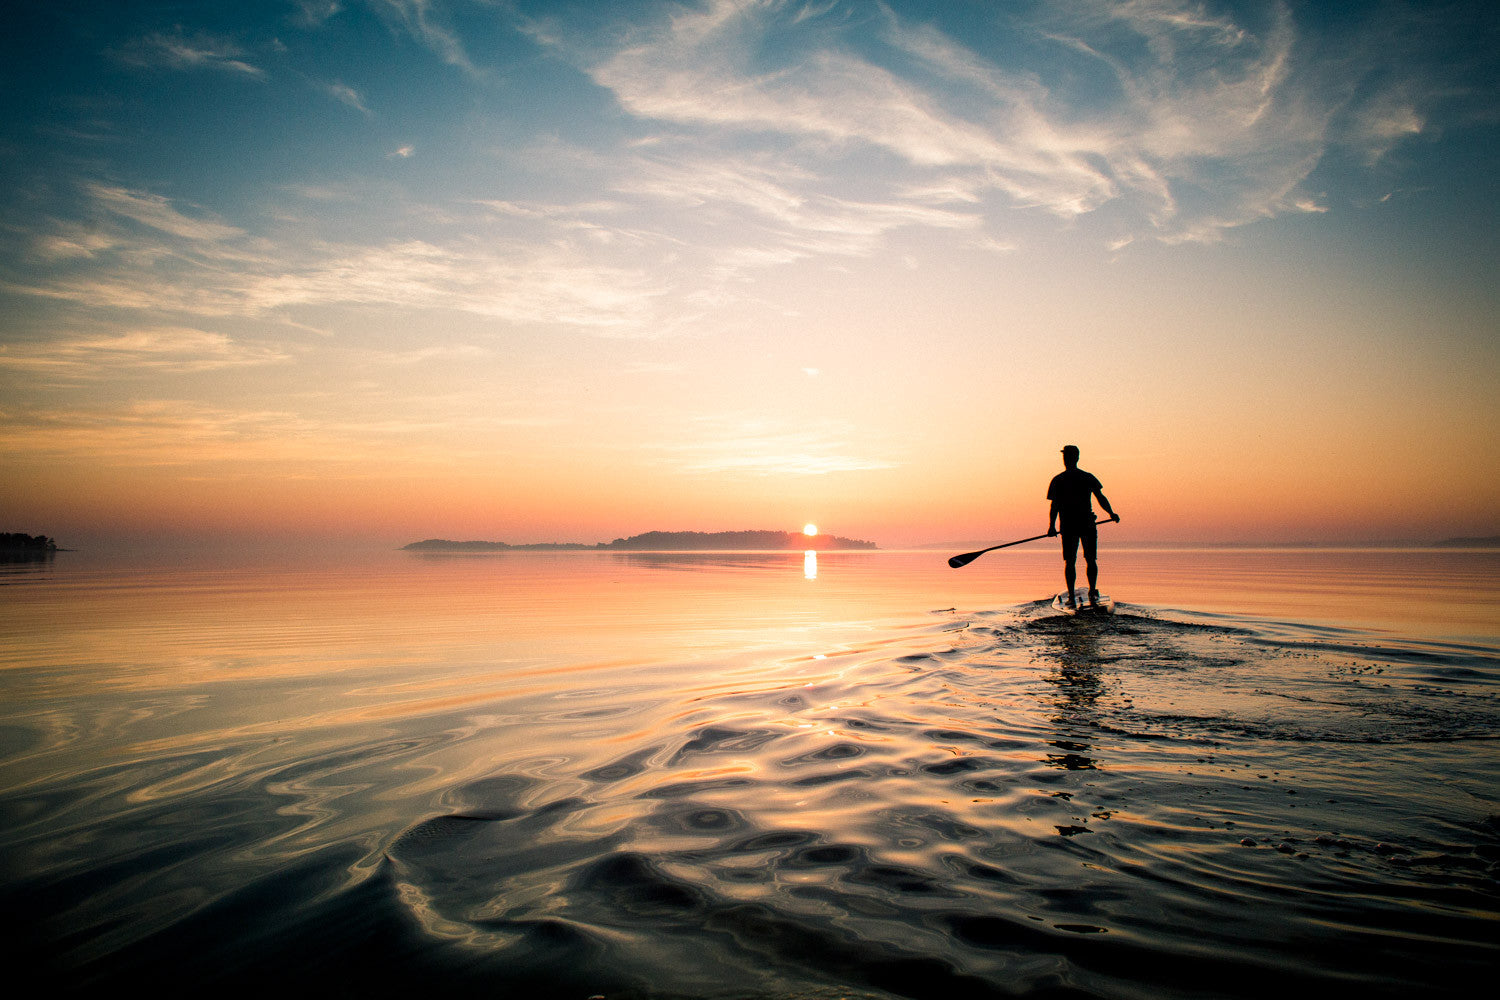 8 reasons why Finland is a SUP paradise and worthy of your next paddling adventure